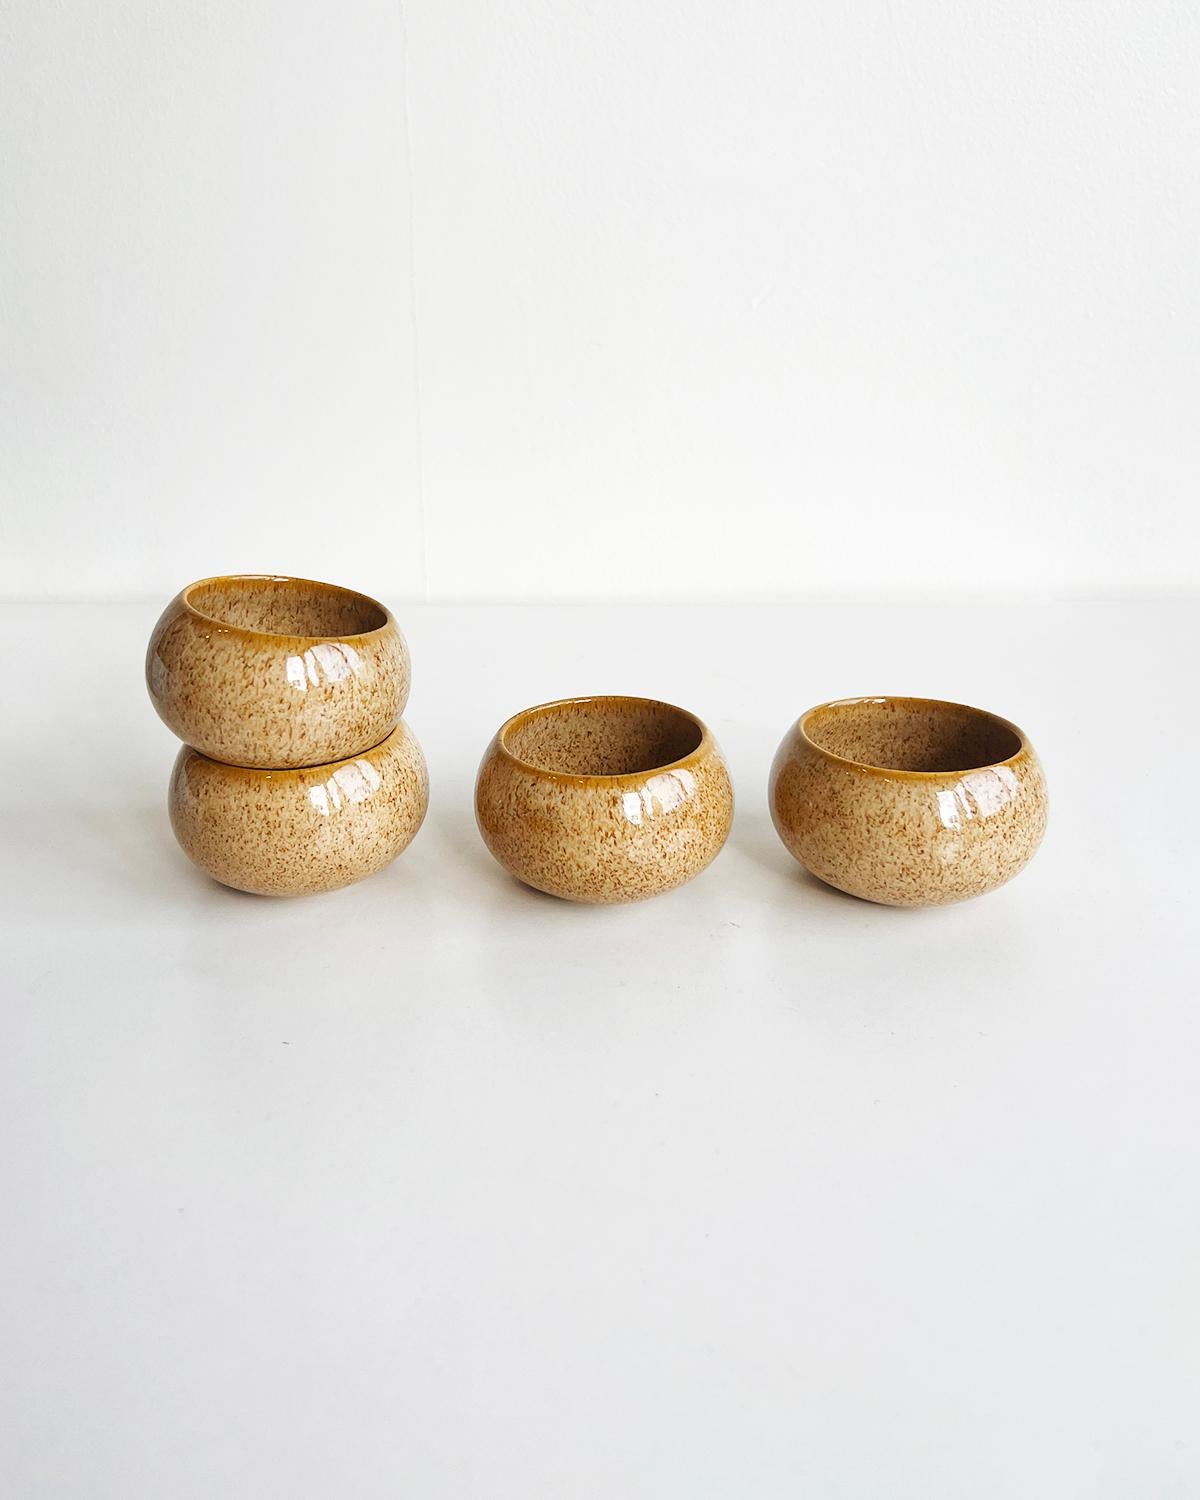 Caramel Beige Handmade Stoneware Mezcal Cups - Set of 4 In New Condition For Sale In West Hollywood, CA